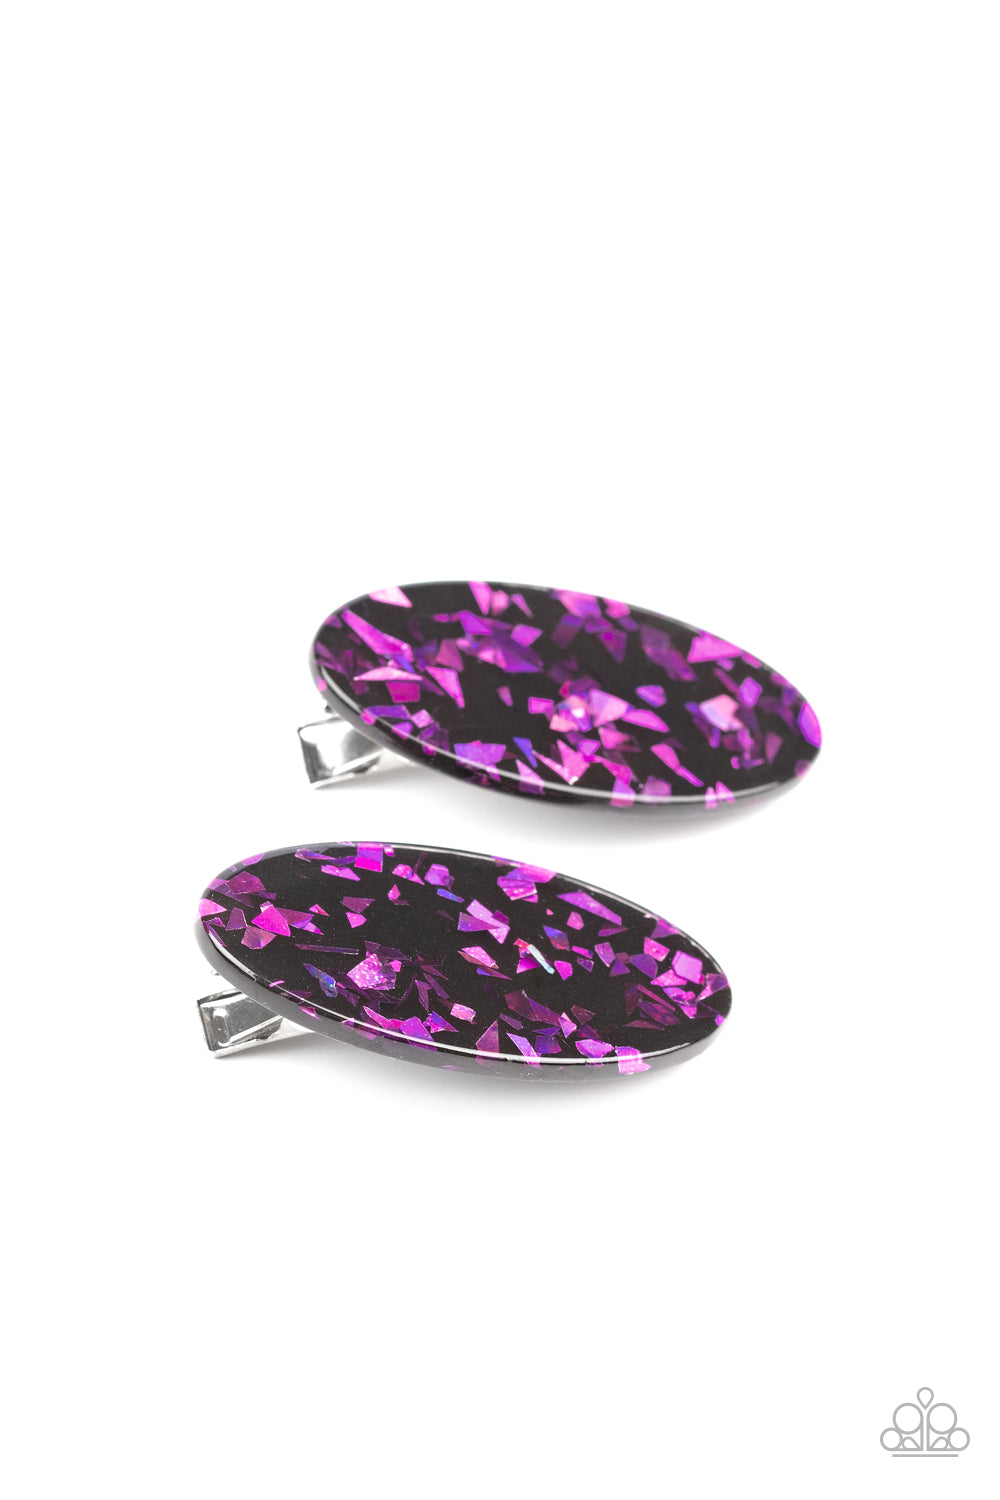 Get OVAL Yourself! Purple Hair Clip - Paparazzi Accessories  Featuring purple iridescent flecks, a pair of black oval hair clips pull back the hair for a retro look. Features a standard hair clip on the back. All Paparazzi Accessories are lead free and nickel free!  Sold as one pair of hair clips.